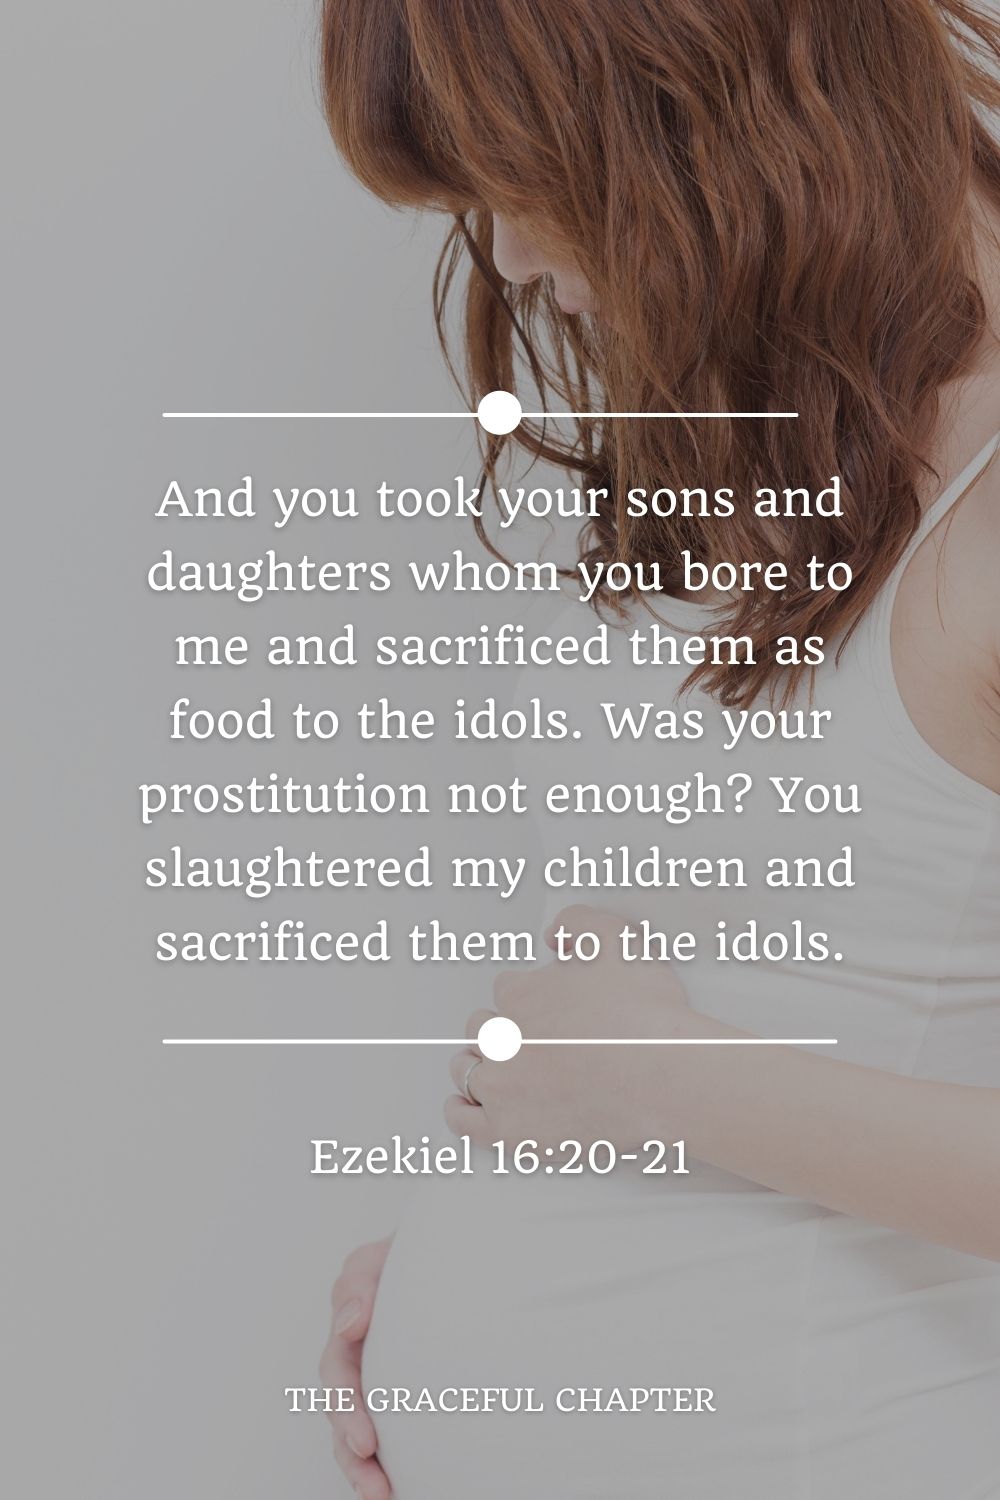 And you took your sons and daughters whom you bore to me and sacrificed them as food to the idols. Was your prostitution not enough? You slaughtered my children and sacrificed them to the idols. Ezekiel 16:20-21